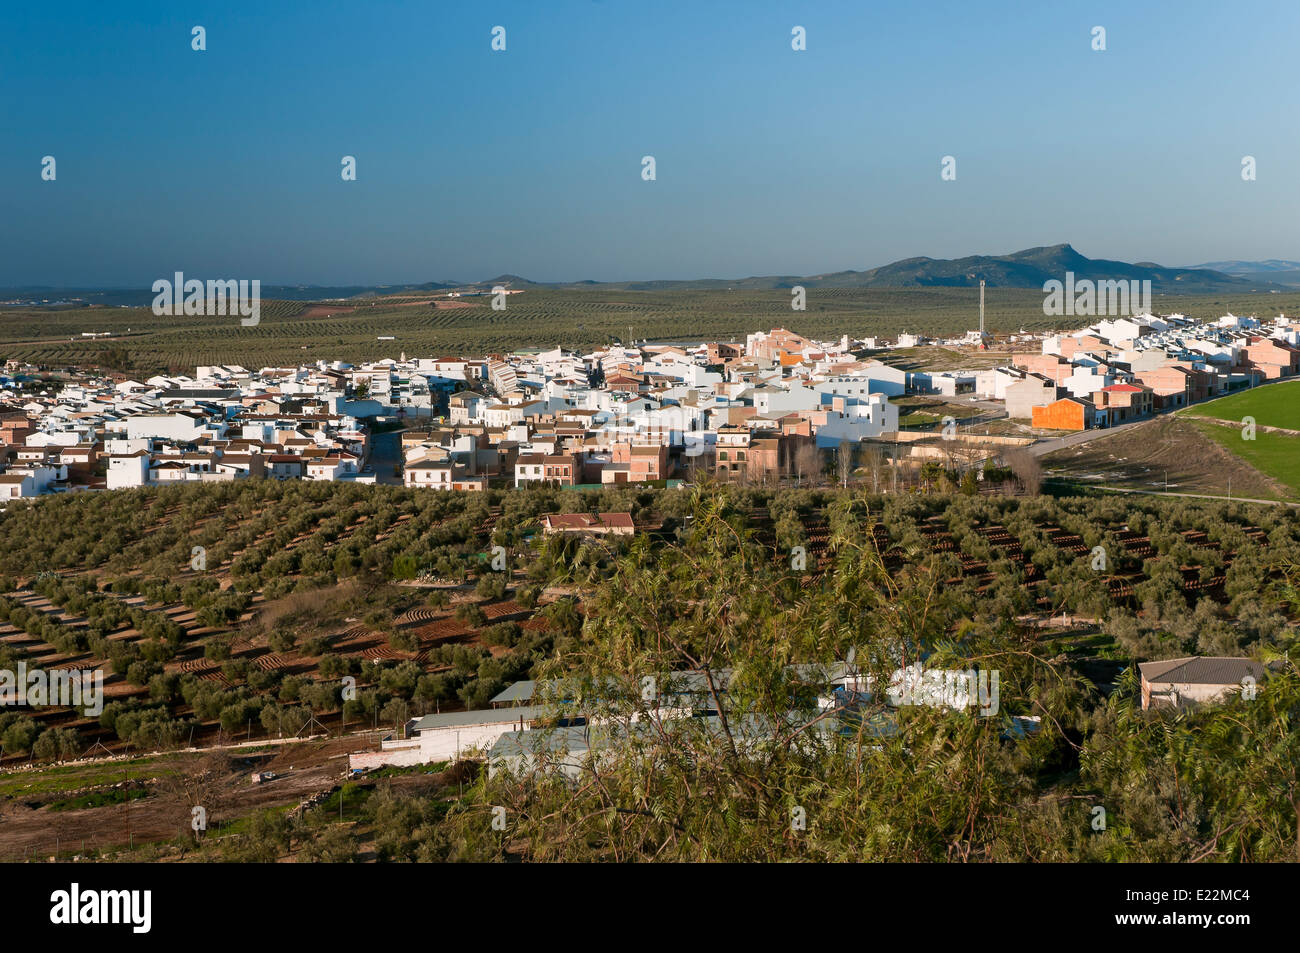 Panoramic view, Town on the Tourist Route of the Bandits, Casariche, Seville province, Region of Andalusia, Spain, Europe Stock Photo